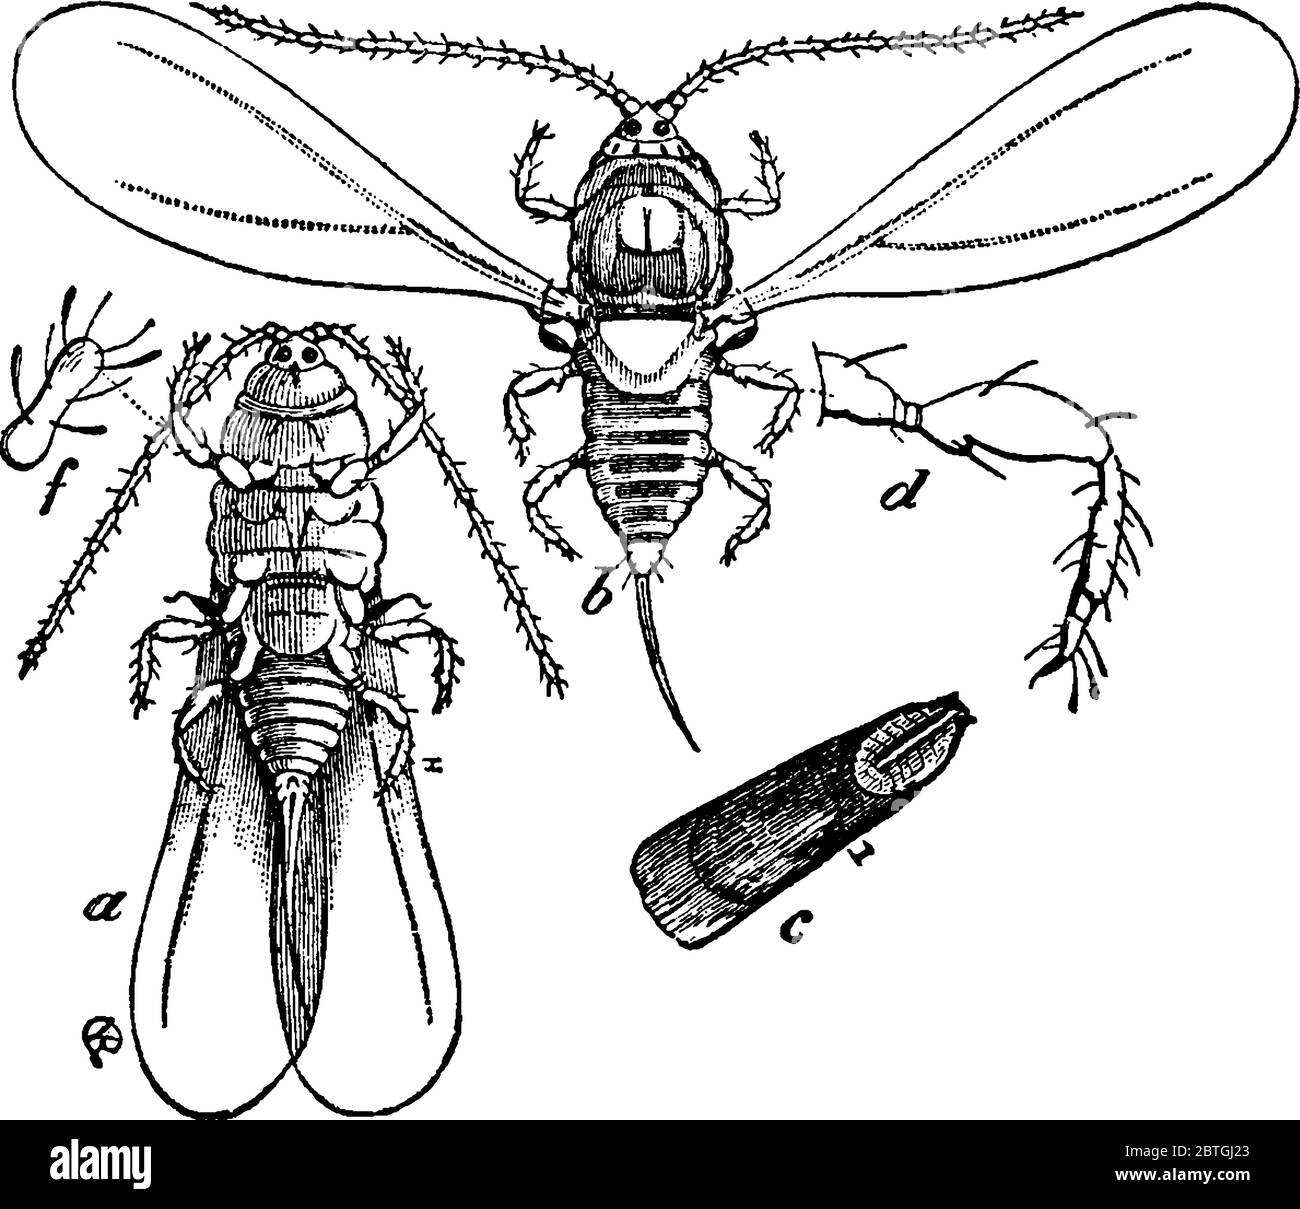 The Scale-insect, with a, b, c, d, e, f, markings representing the ventral view with wings closed, dorsal view with wings expanded, scale, leg and the Stock Vector